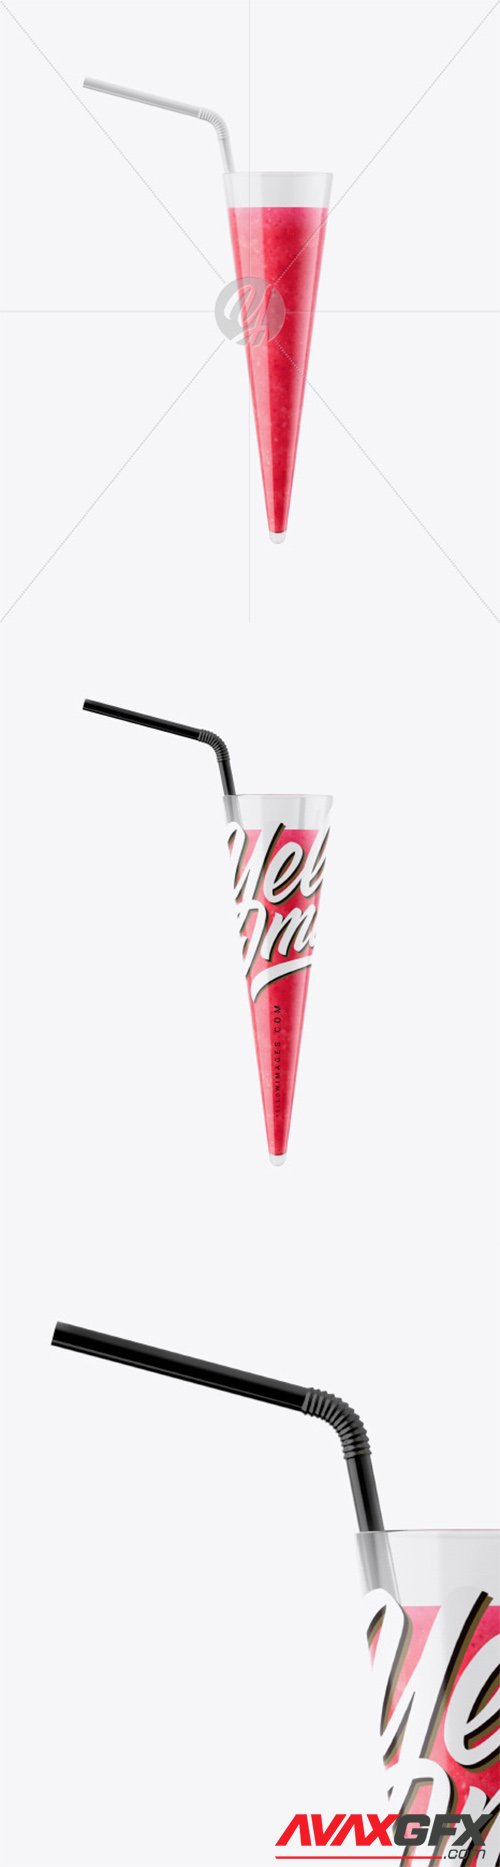 Plastic Cup w/ Berries Smoothie and Straw Mockup 60720